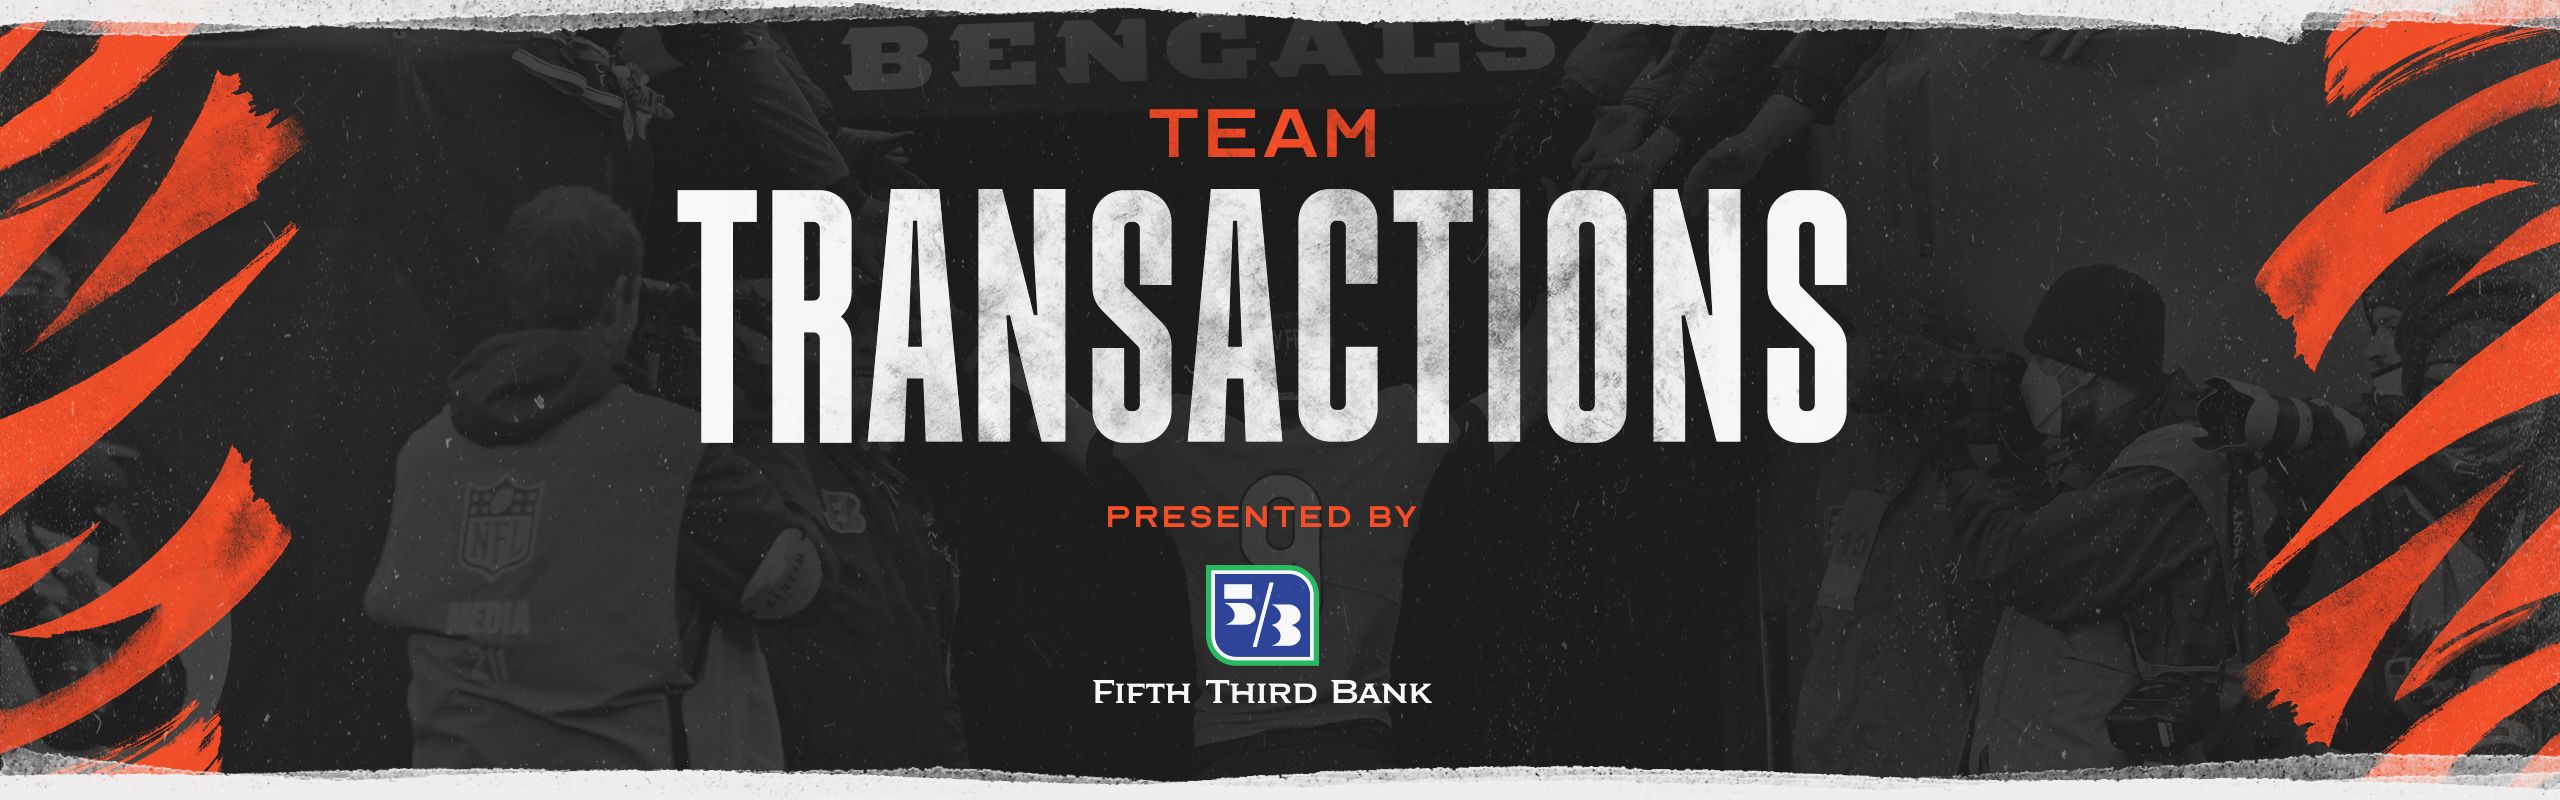 nfl transactions today